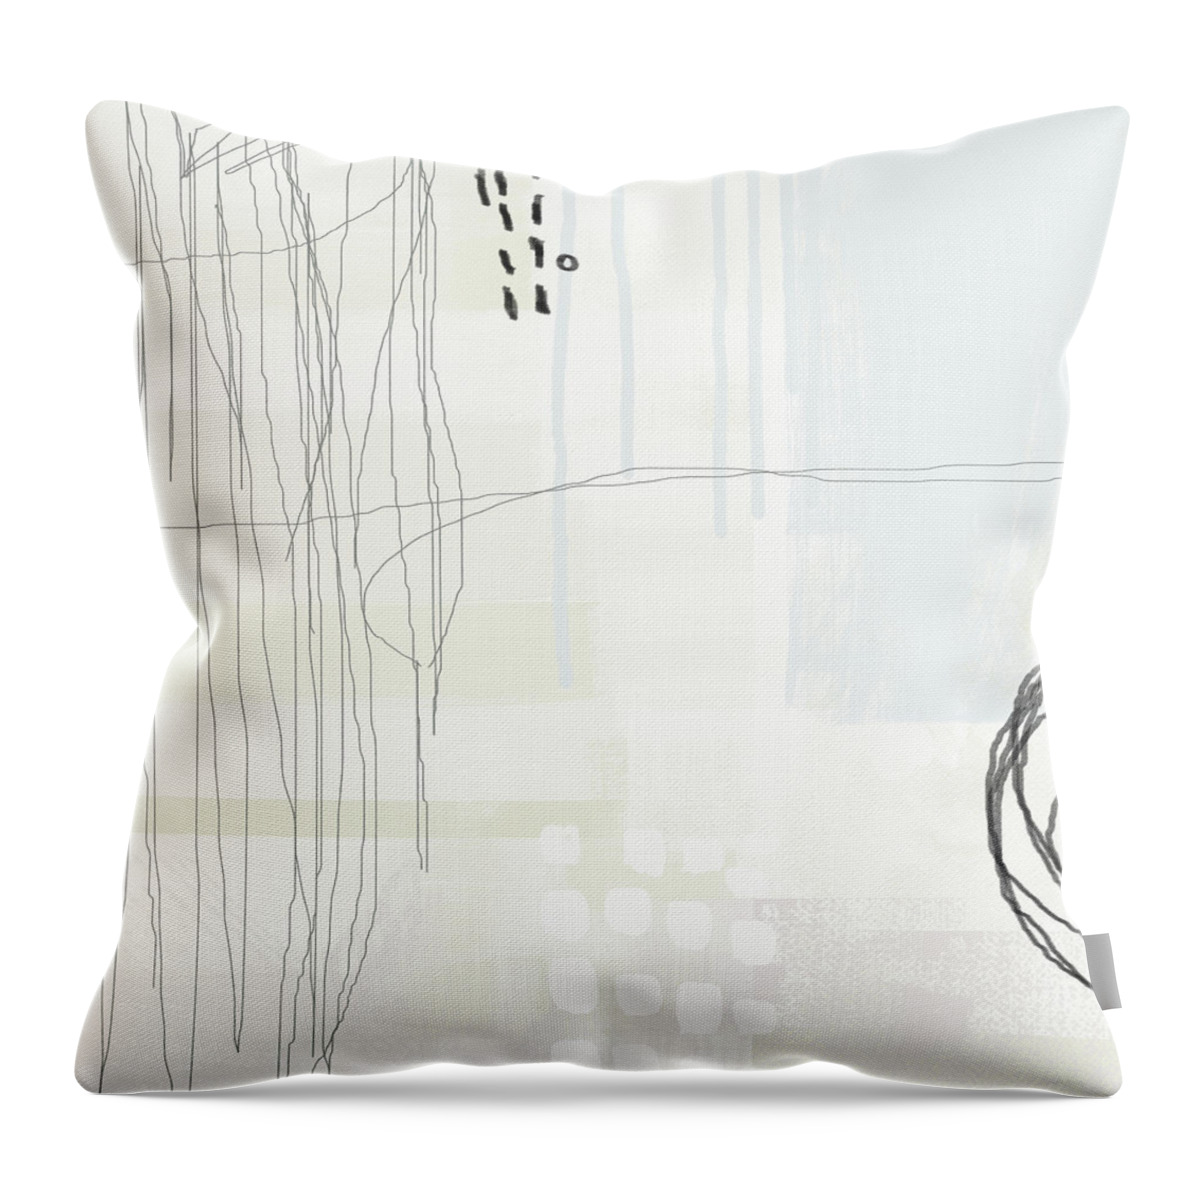 Abstract Throw Pillow featuring the painting Shades of White 1 - Art by Linda Woods by Linda Woods